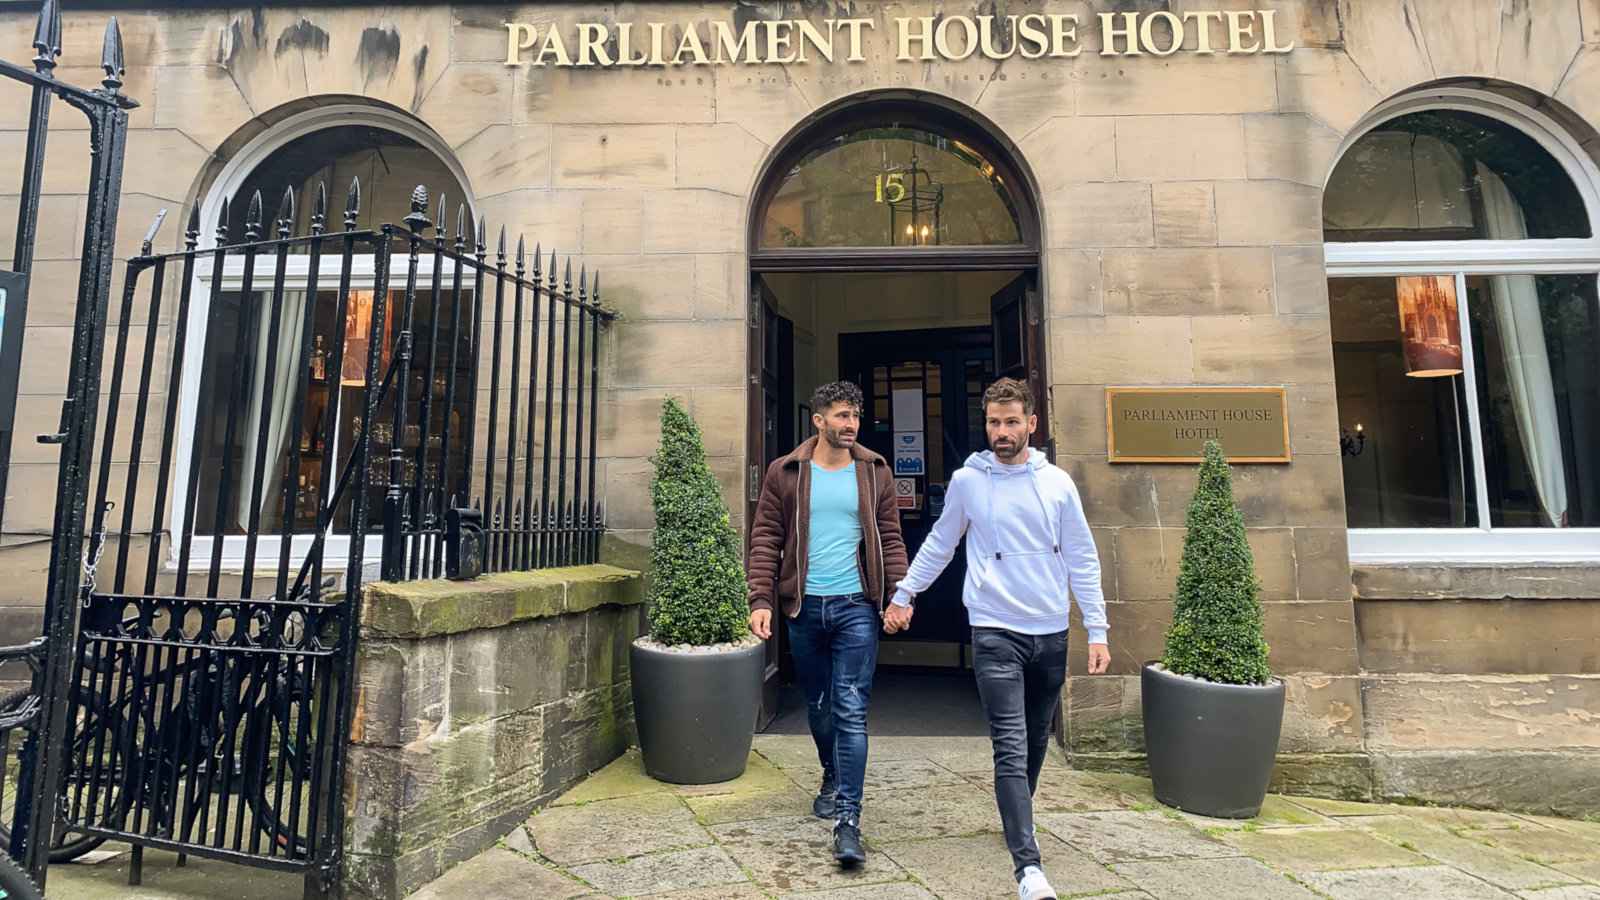 Parliament House Hotel is our favourite hotel to stay at in gay Edinburgh